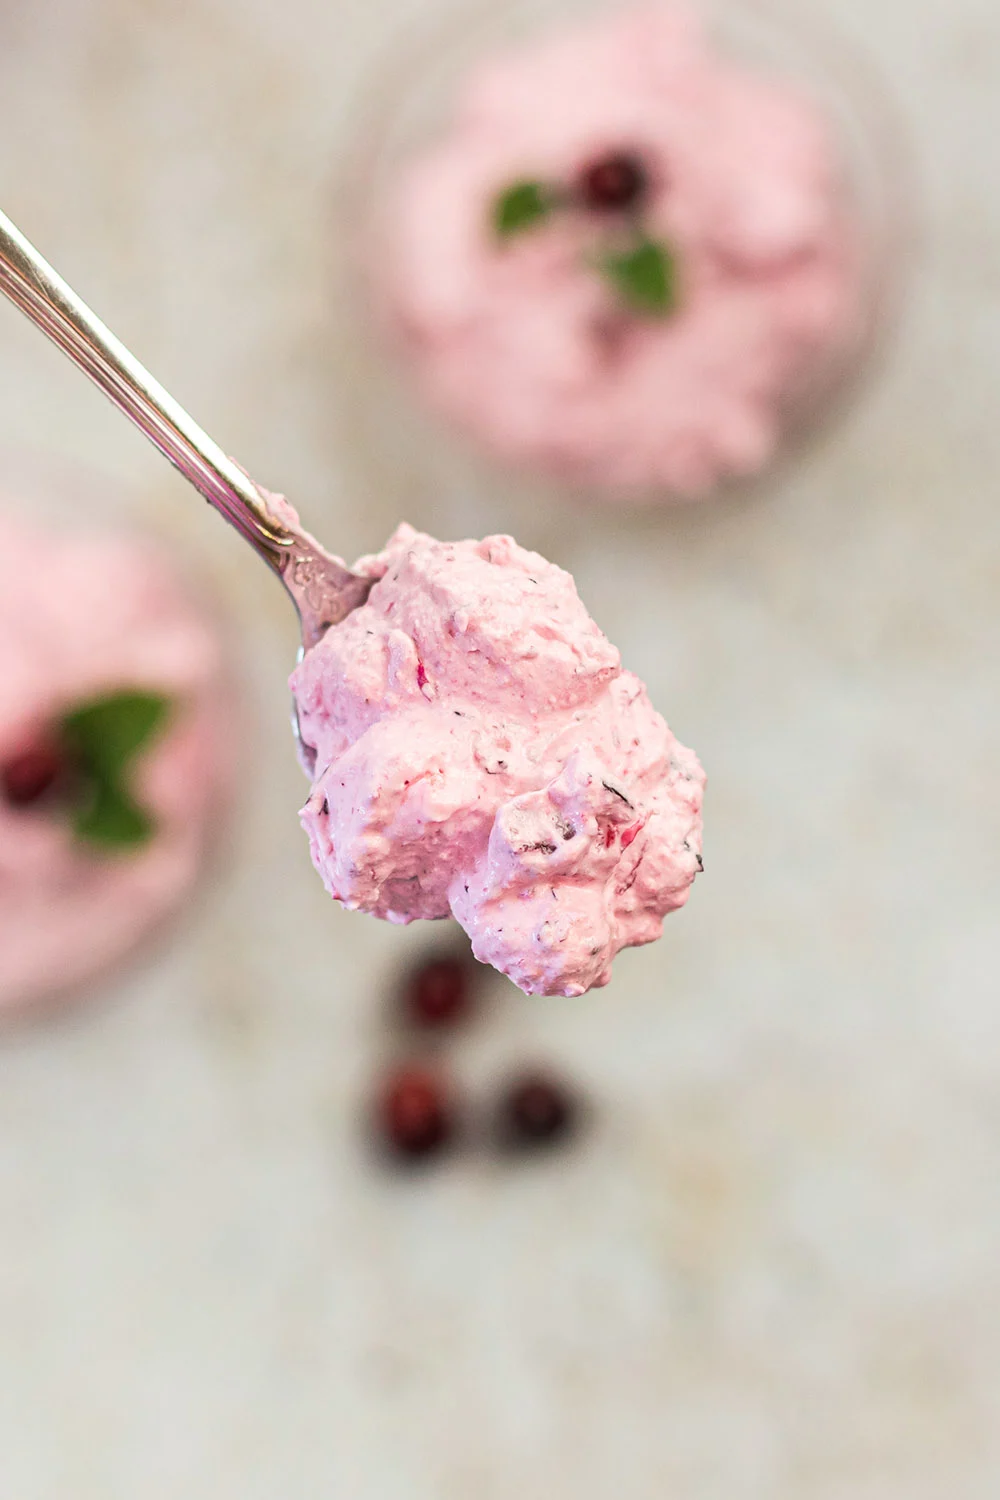 Spoon full of pink whipped cranberry salad.